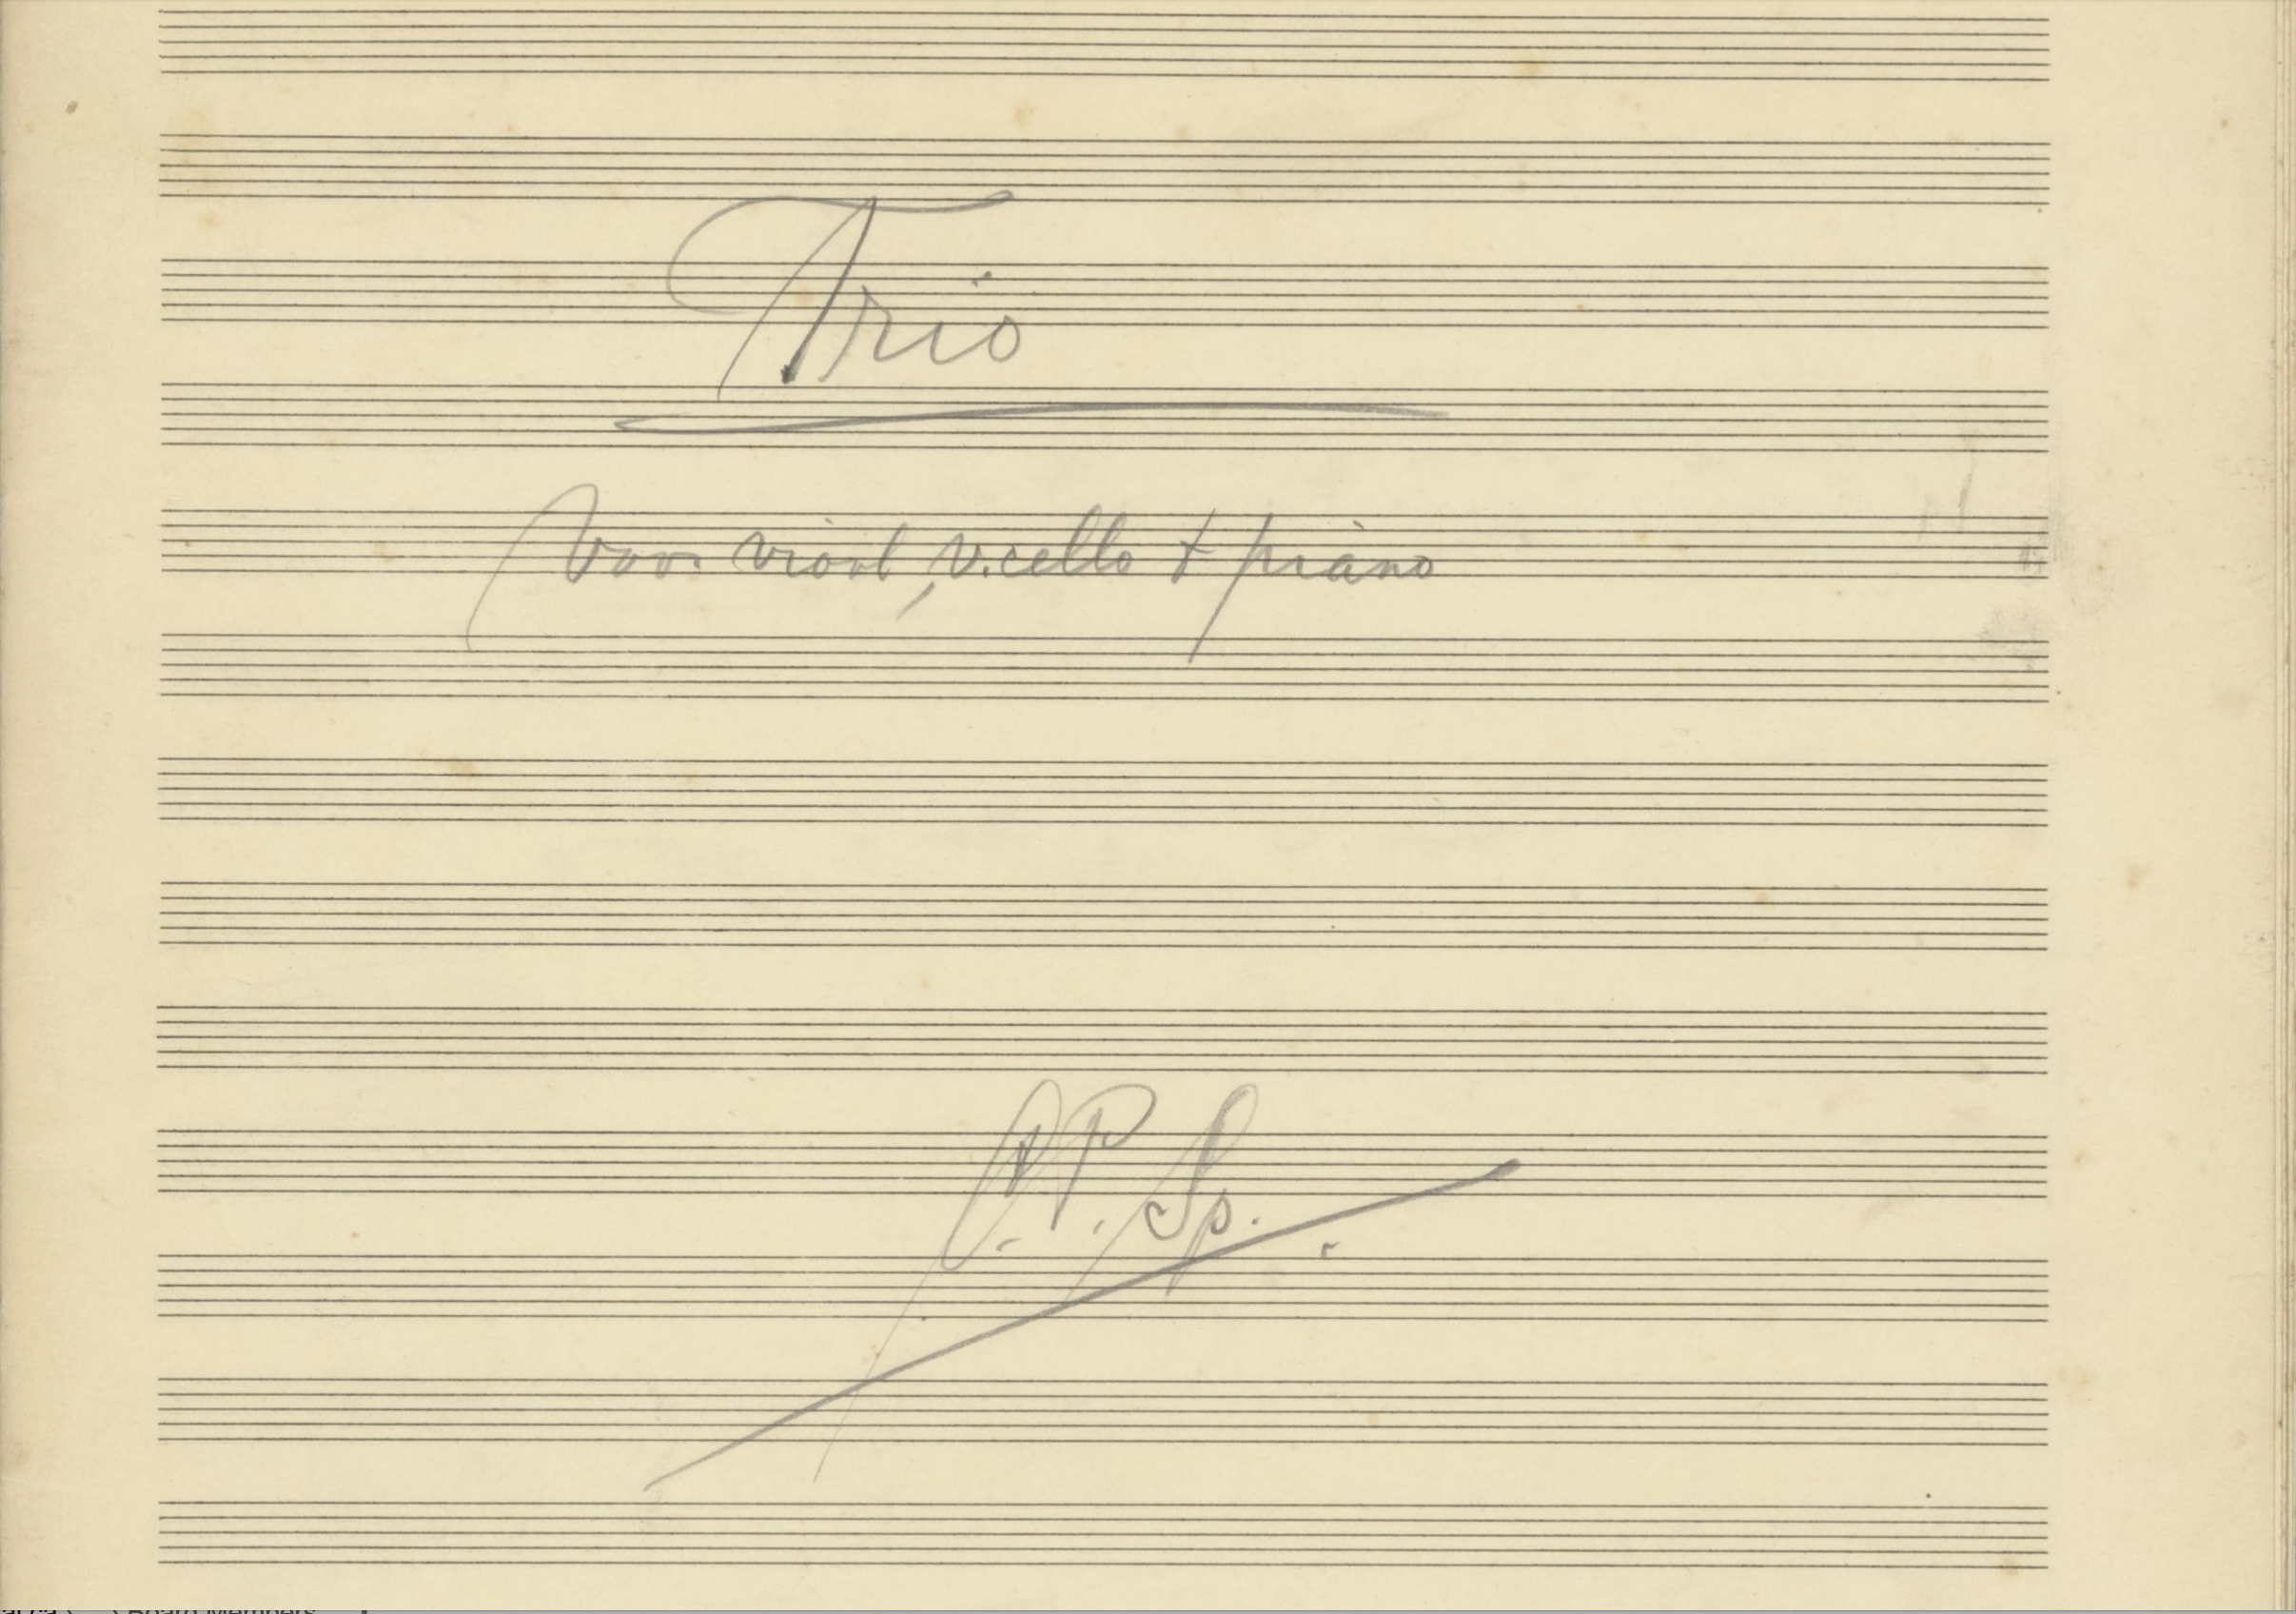  The Bob Hanf music score from Arthur’s concert, showing C.P Sp. as the composer. 